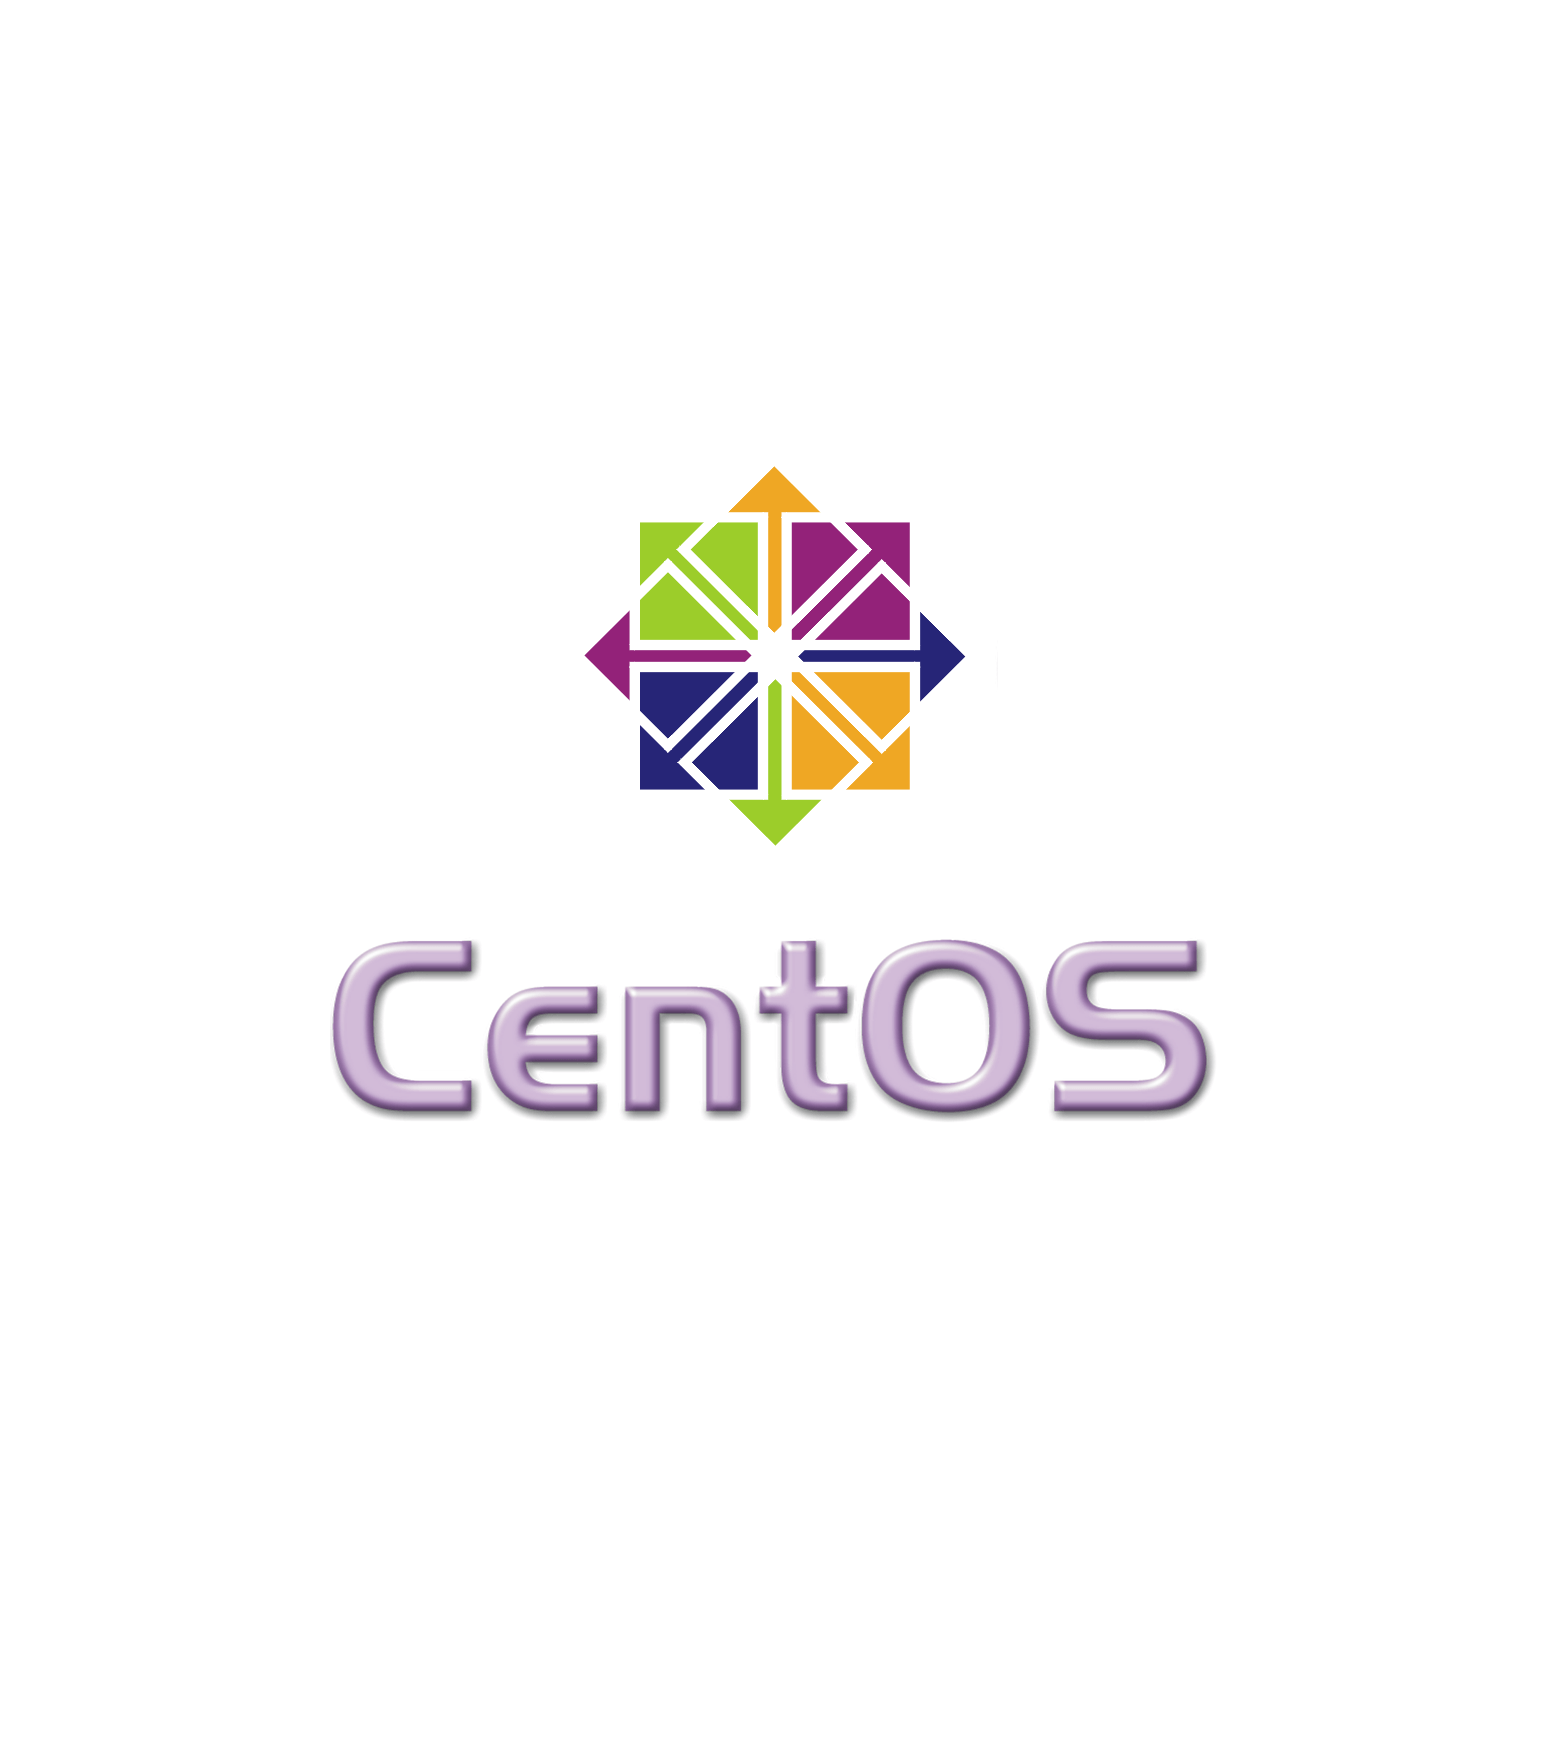 RHEL Server Logo - Time to update! New release of CentOS Linux 7